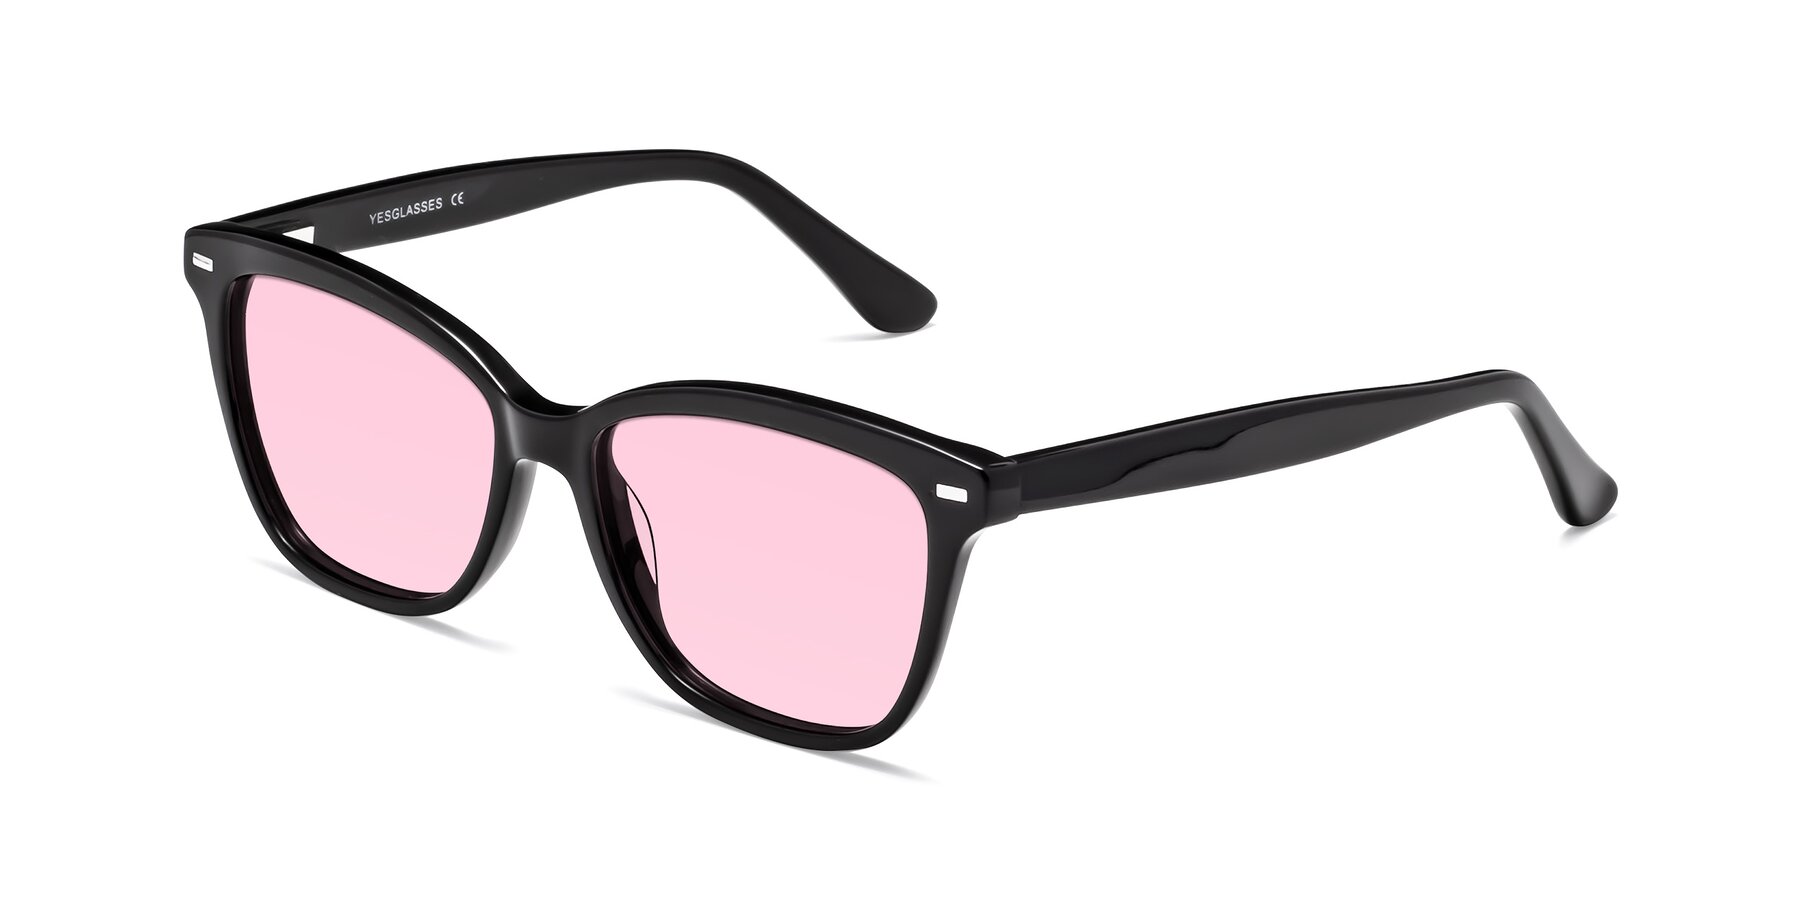 Angle of 17485 in Black with Light Pink Tinted Lenses